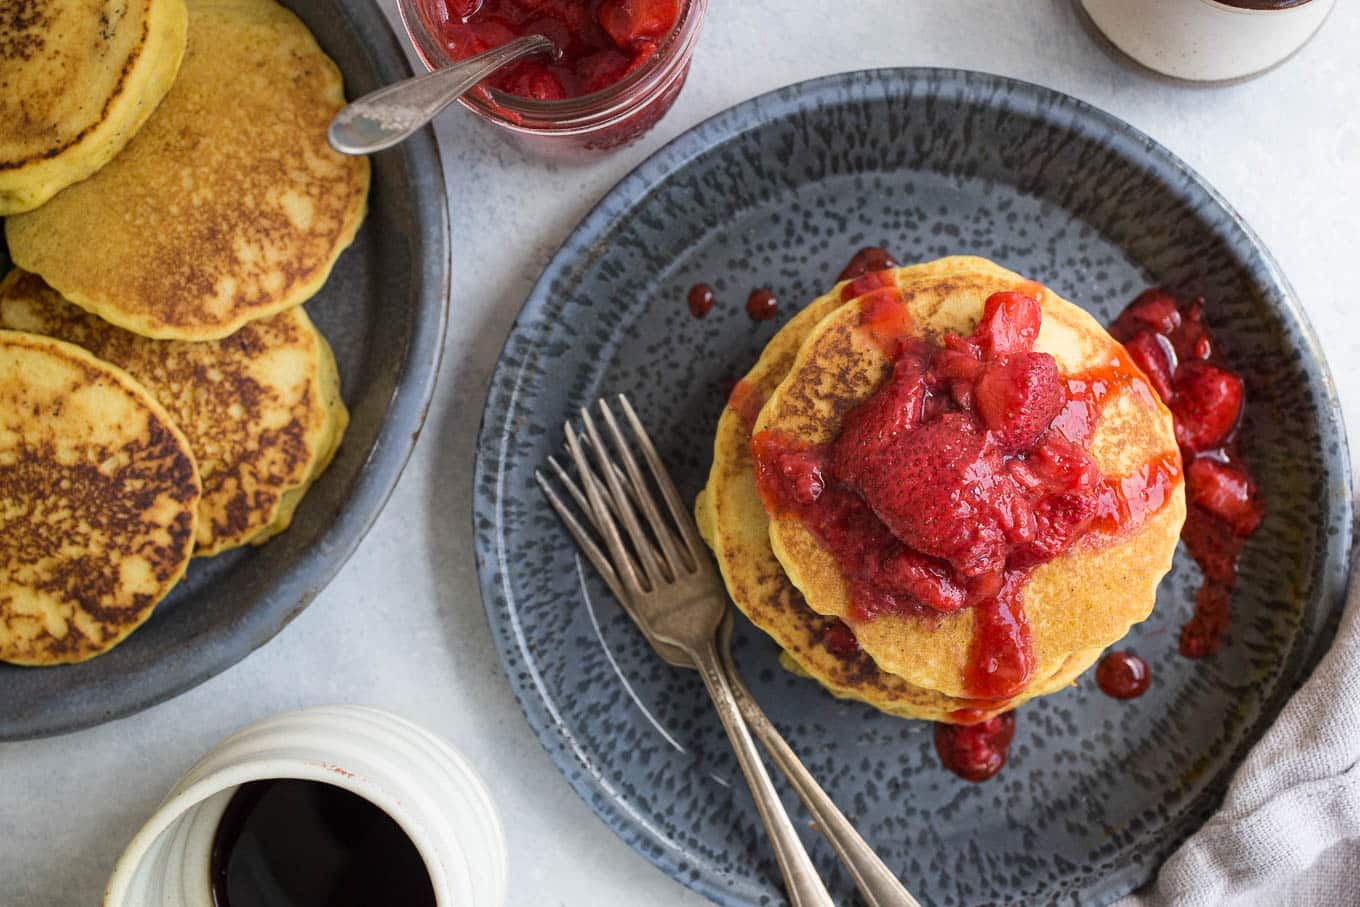 Corn Flour Pancakes with Strawberry Compote (gluten-free, dairy-free) | saltedplains.com